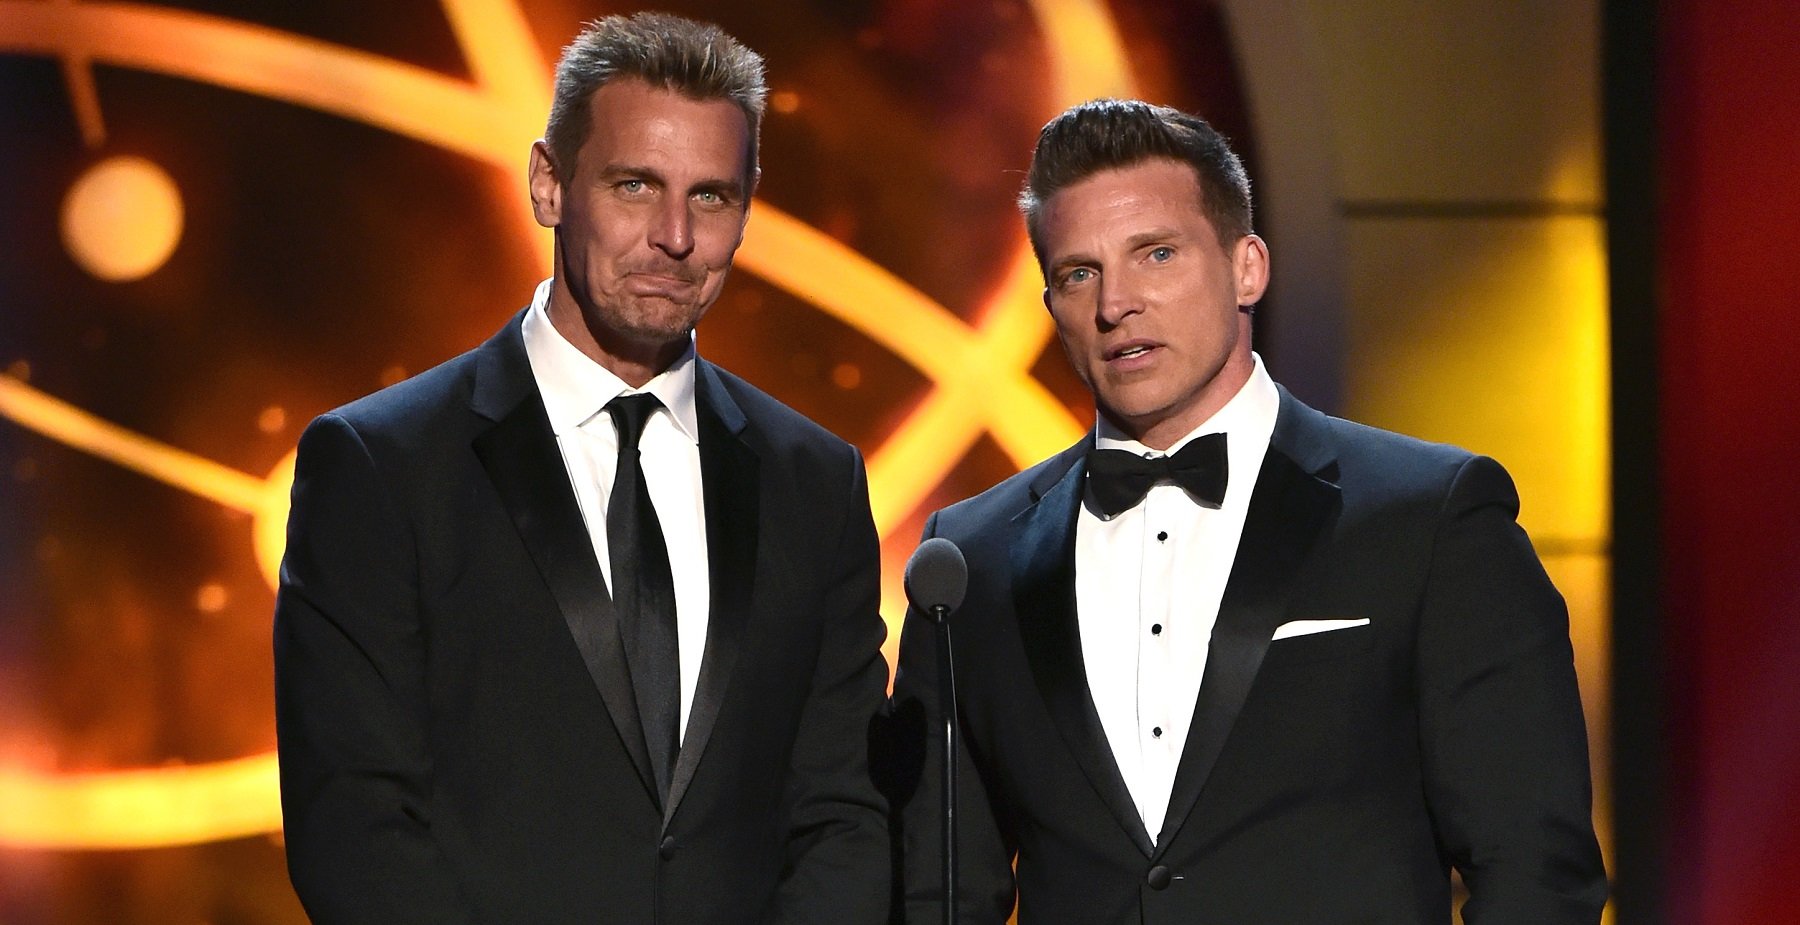 General Hospital stars Jax and Jason, pictured here in tuxedos